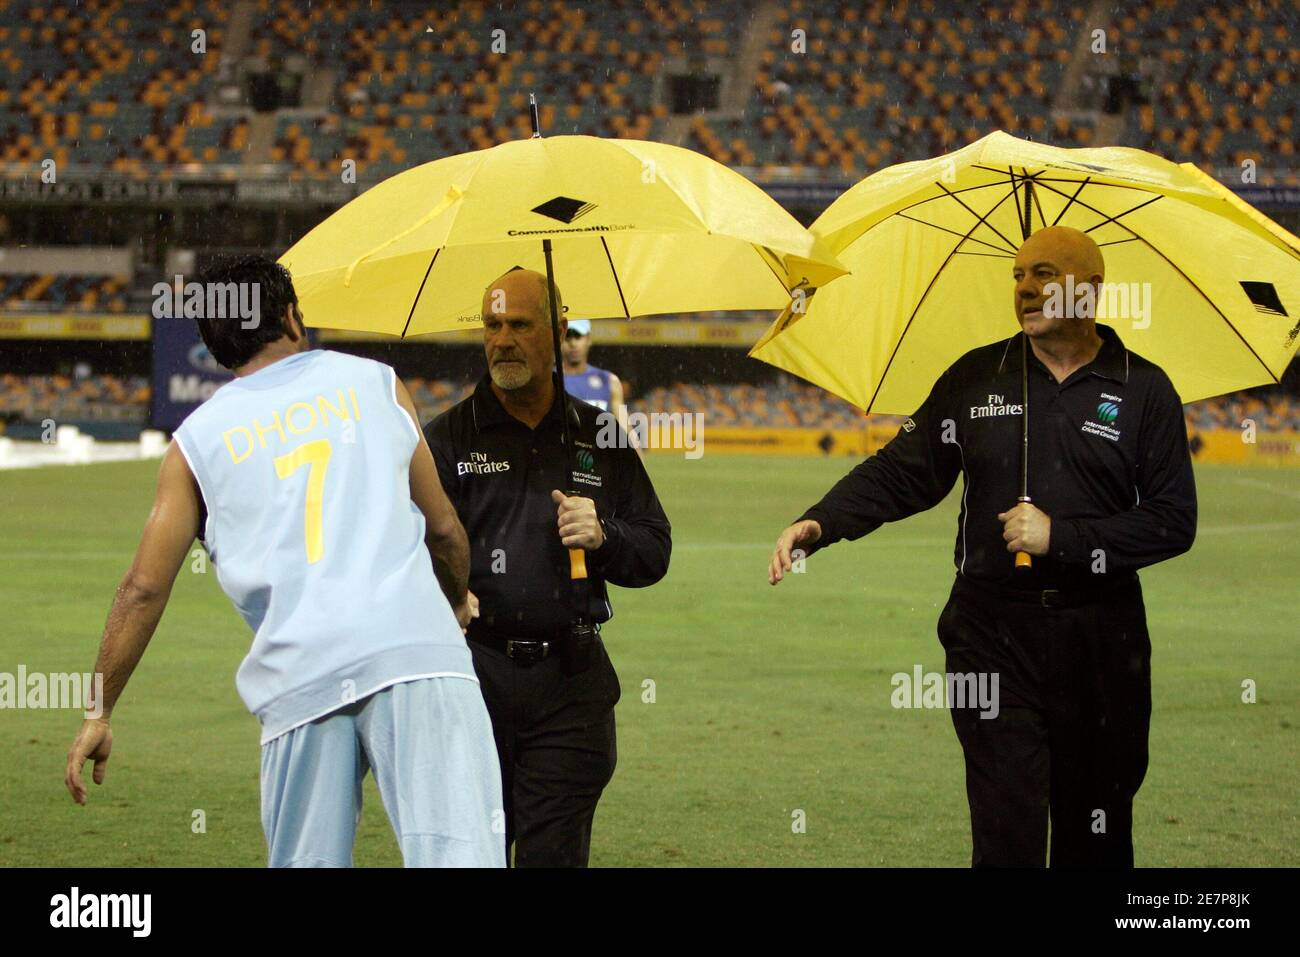 Umpires Steve Davis (R) and Rudi Koertzen (C) shake hands with India's Mahendra Singh Dhoni after play was called off because of rain at the tri-series one-day international cricket match against Sri Lanka in Brisbane February 5, 2008.  REUTERS/Steve Holland (AUSTRALIA) Stock Photo